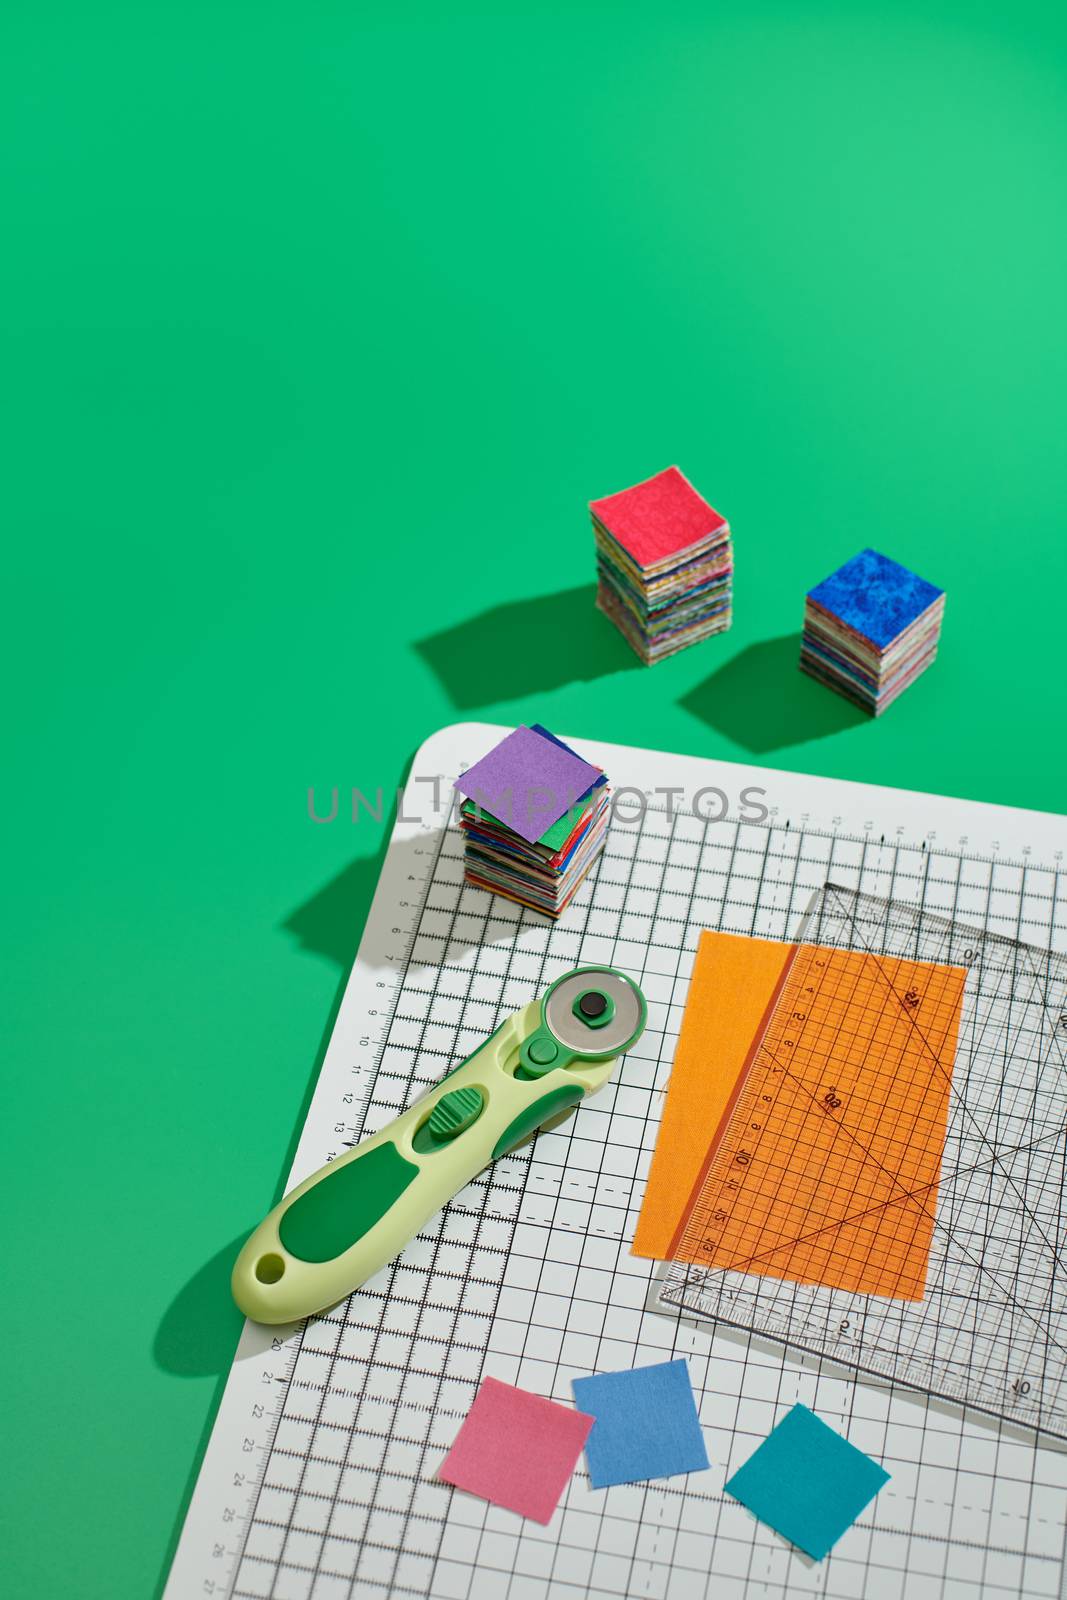 Rotary cutter, ruler, bright square pieces of fabric, stack of bright square fabric pieces on craft mat, green background